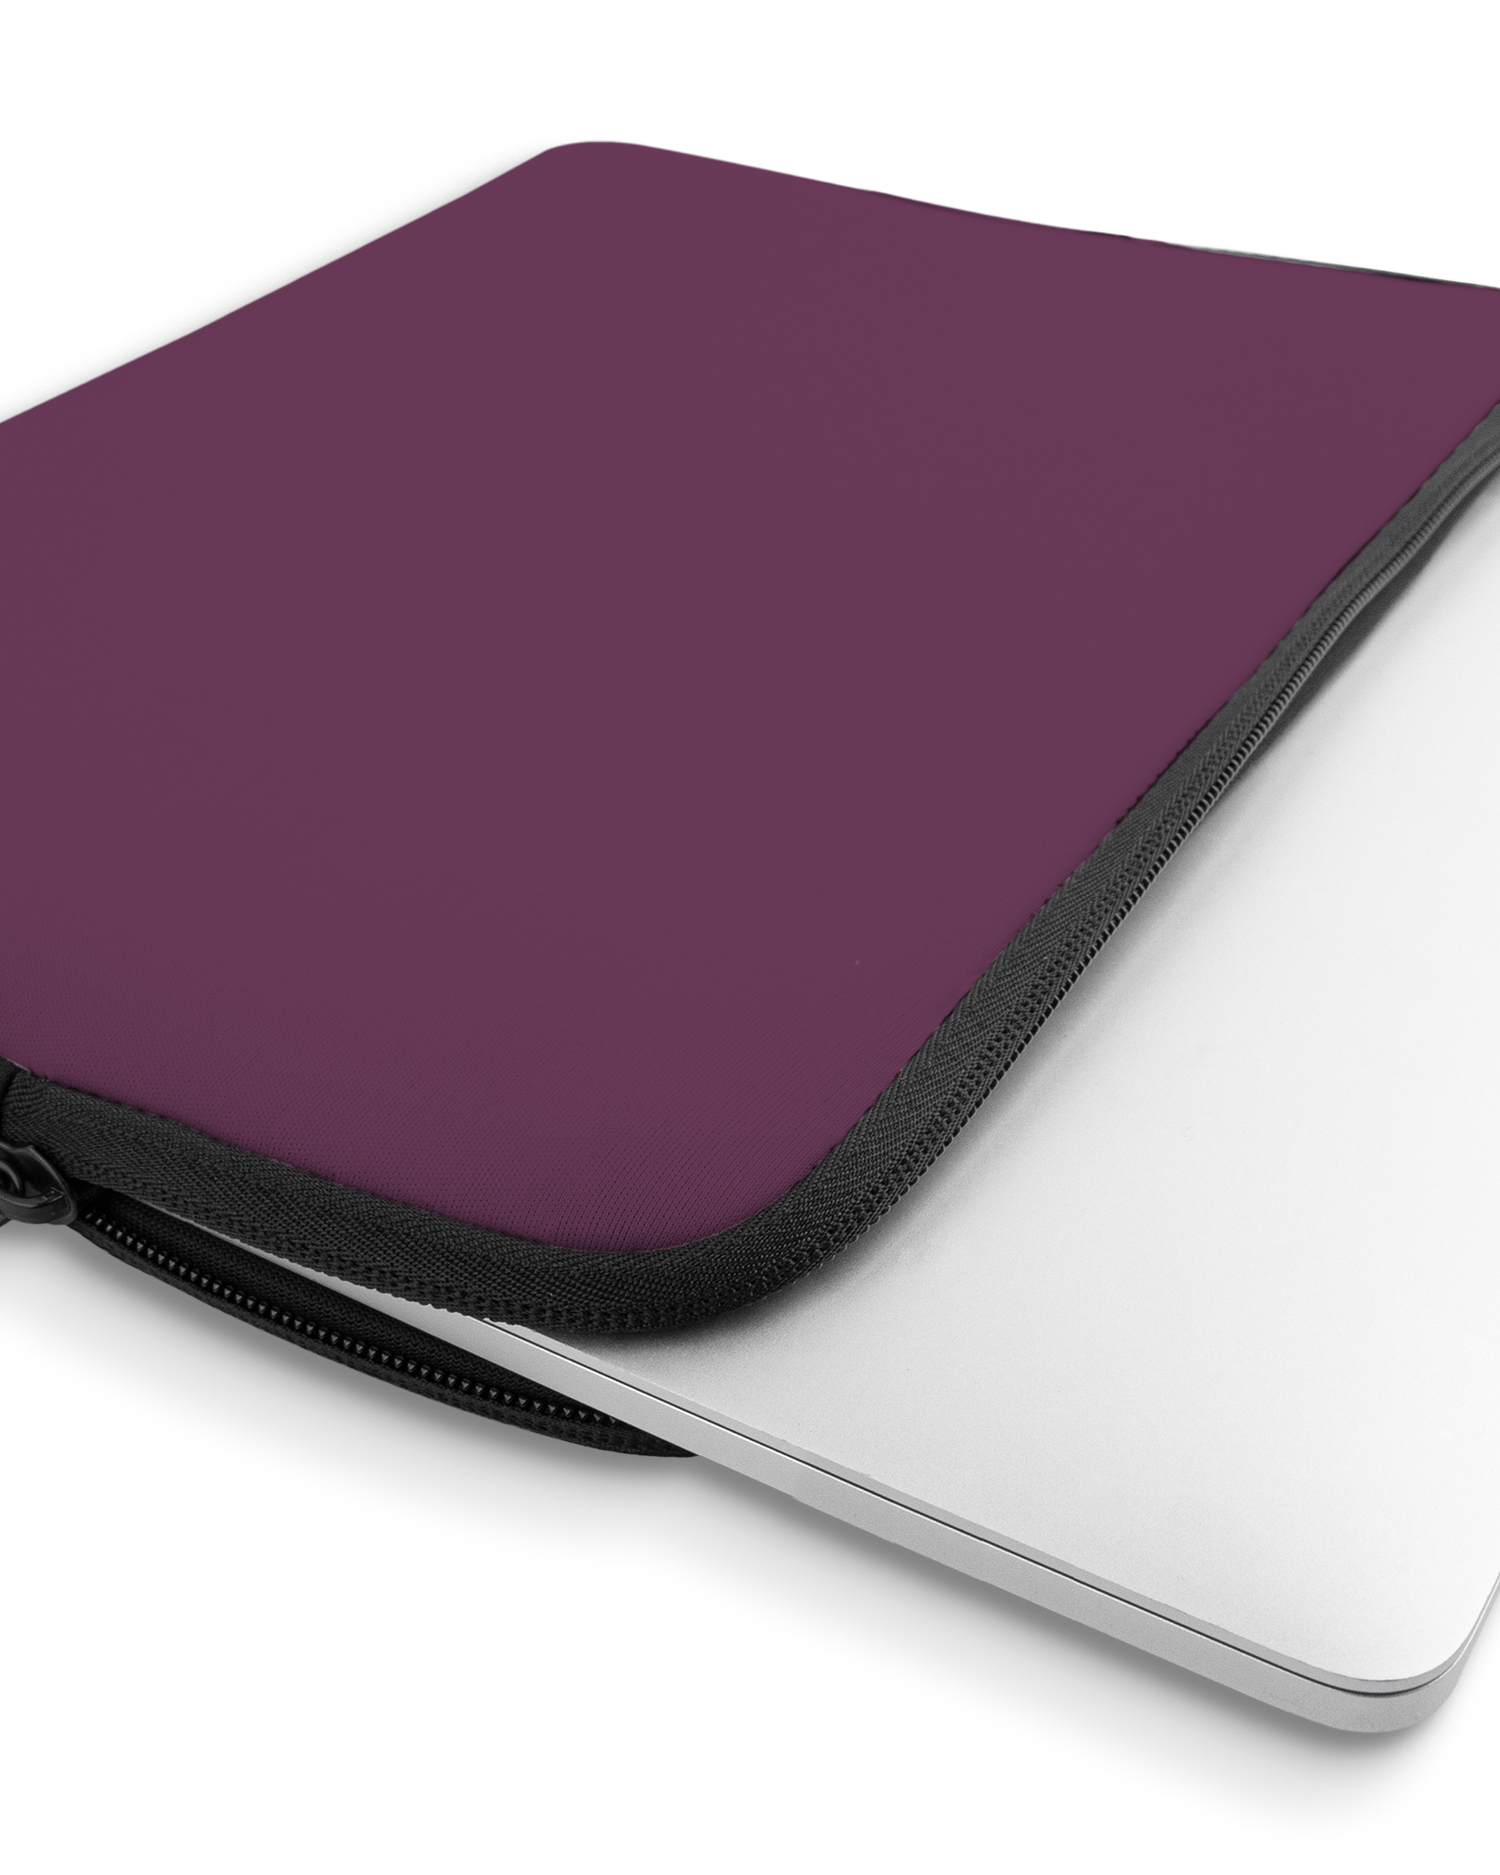 PLUM Laptop Case 13 inch with device inside